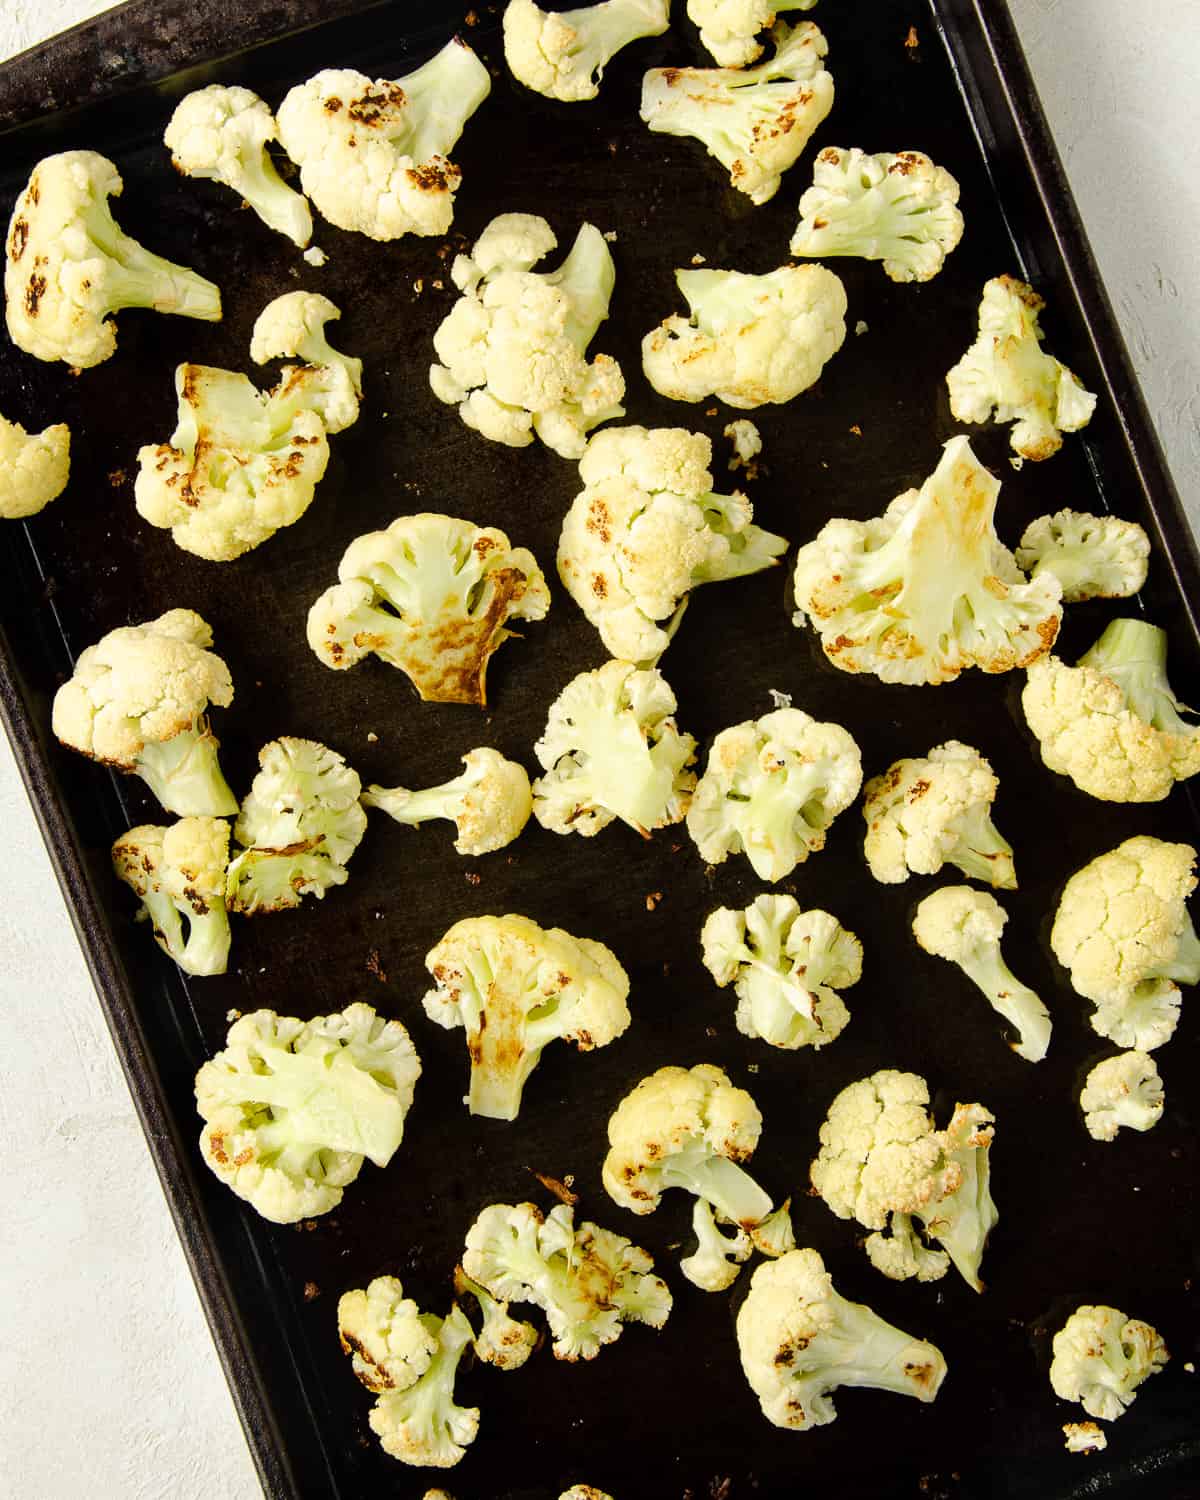 Cauliflower florets browned after roasting.